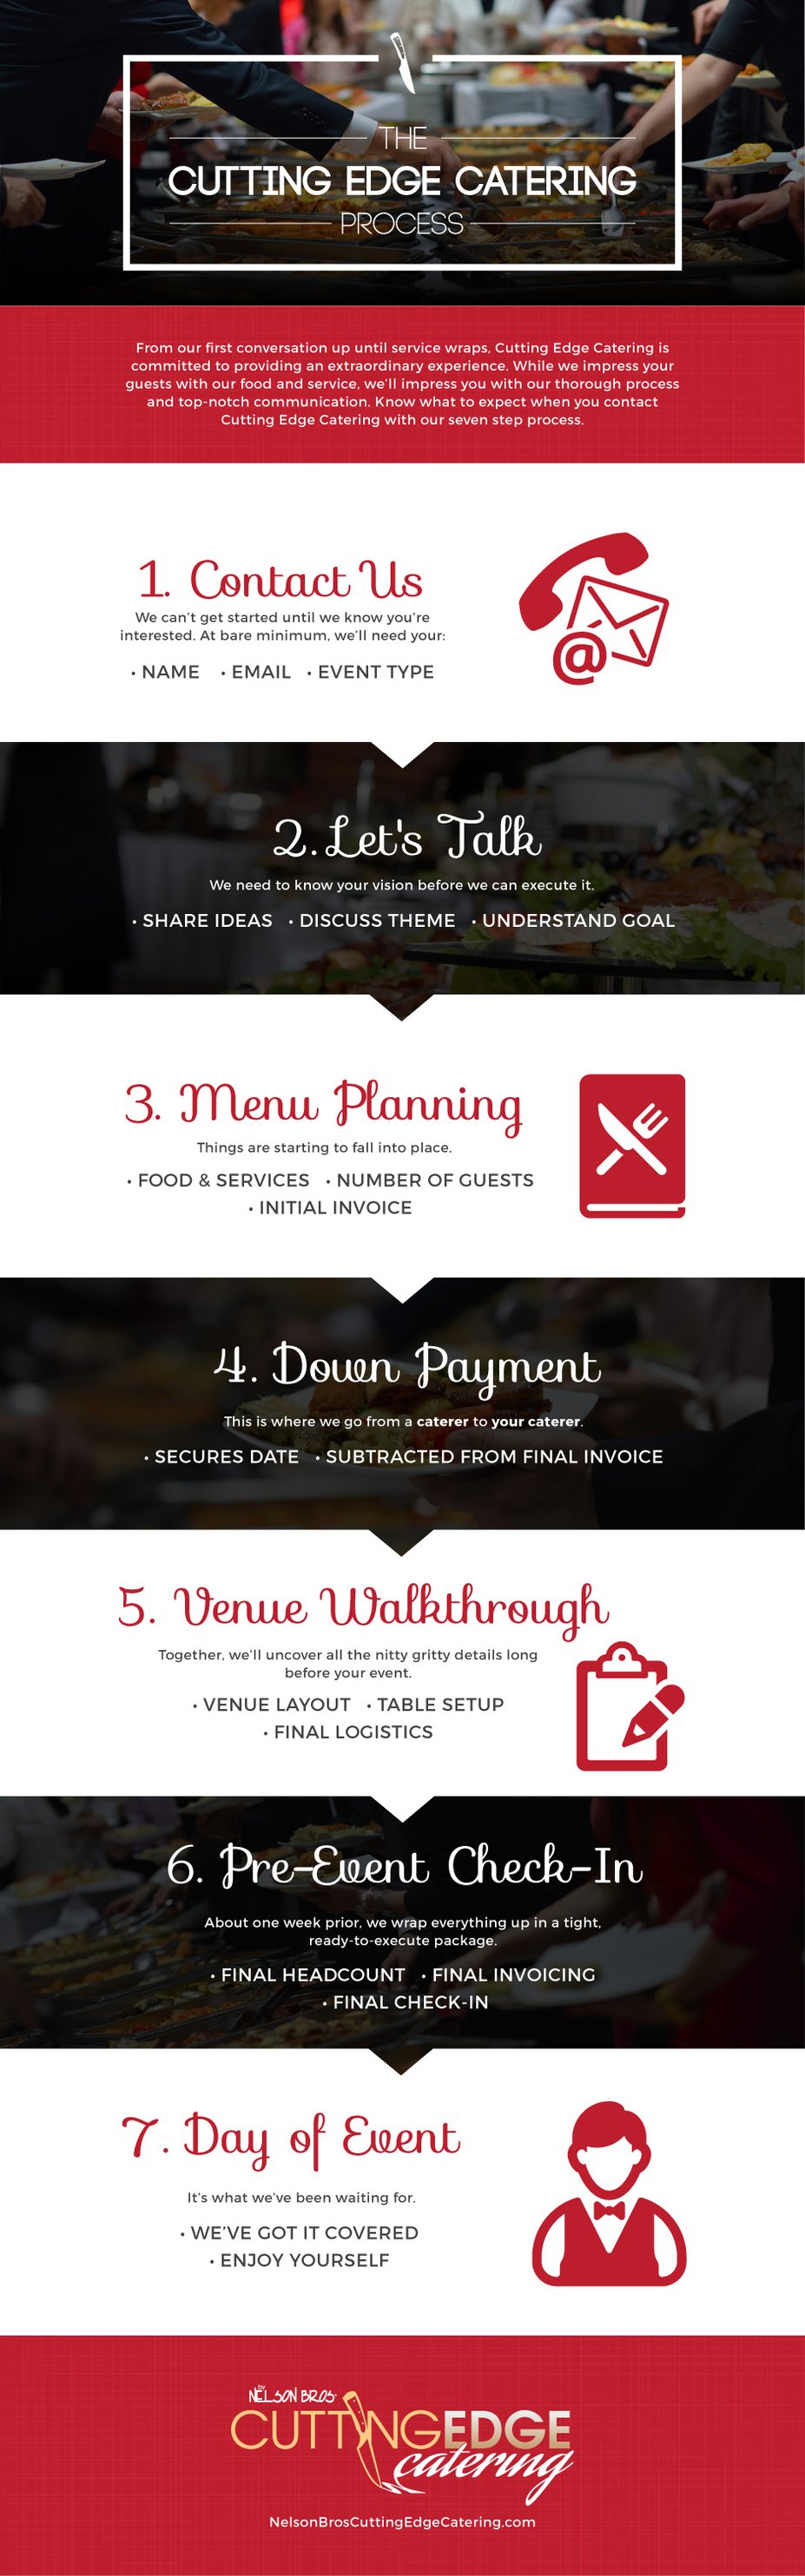 Cutting Edge Catering Process Infographic